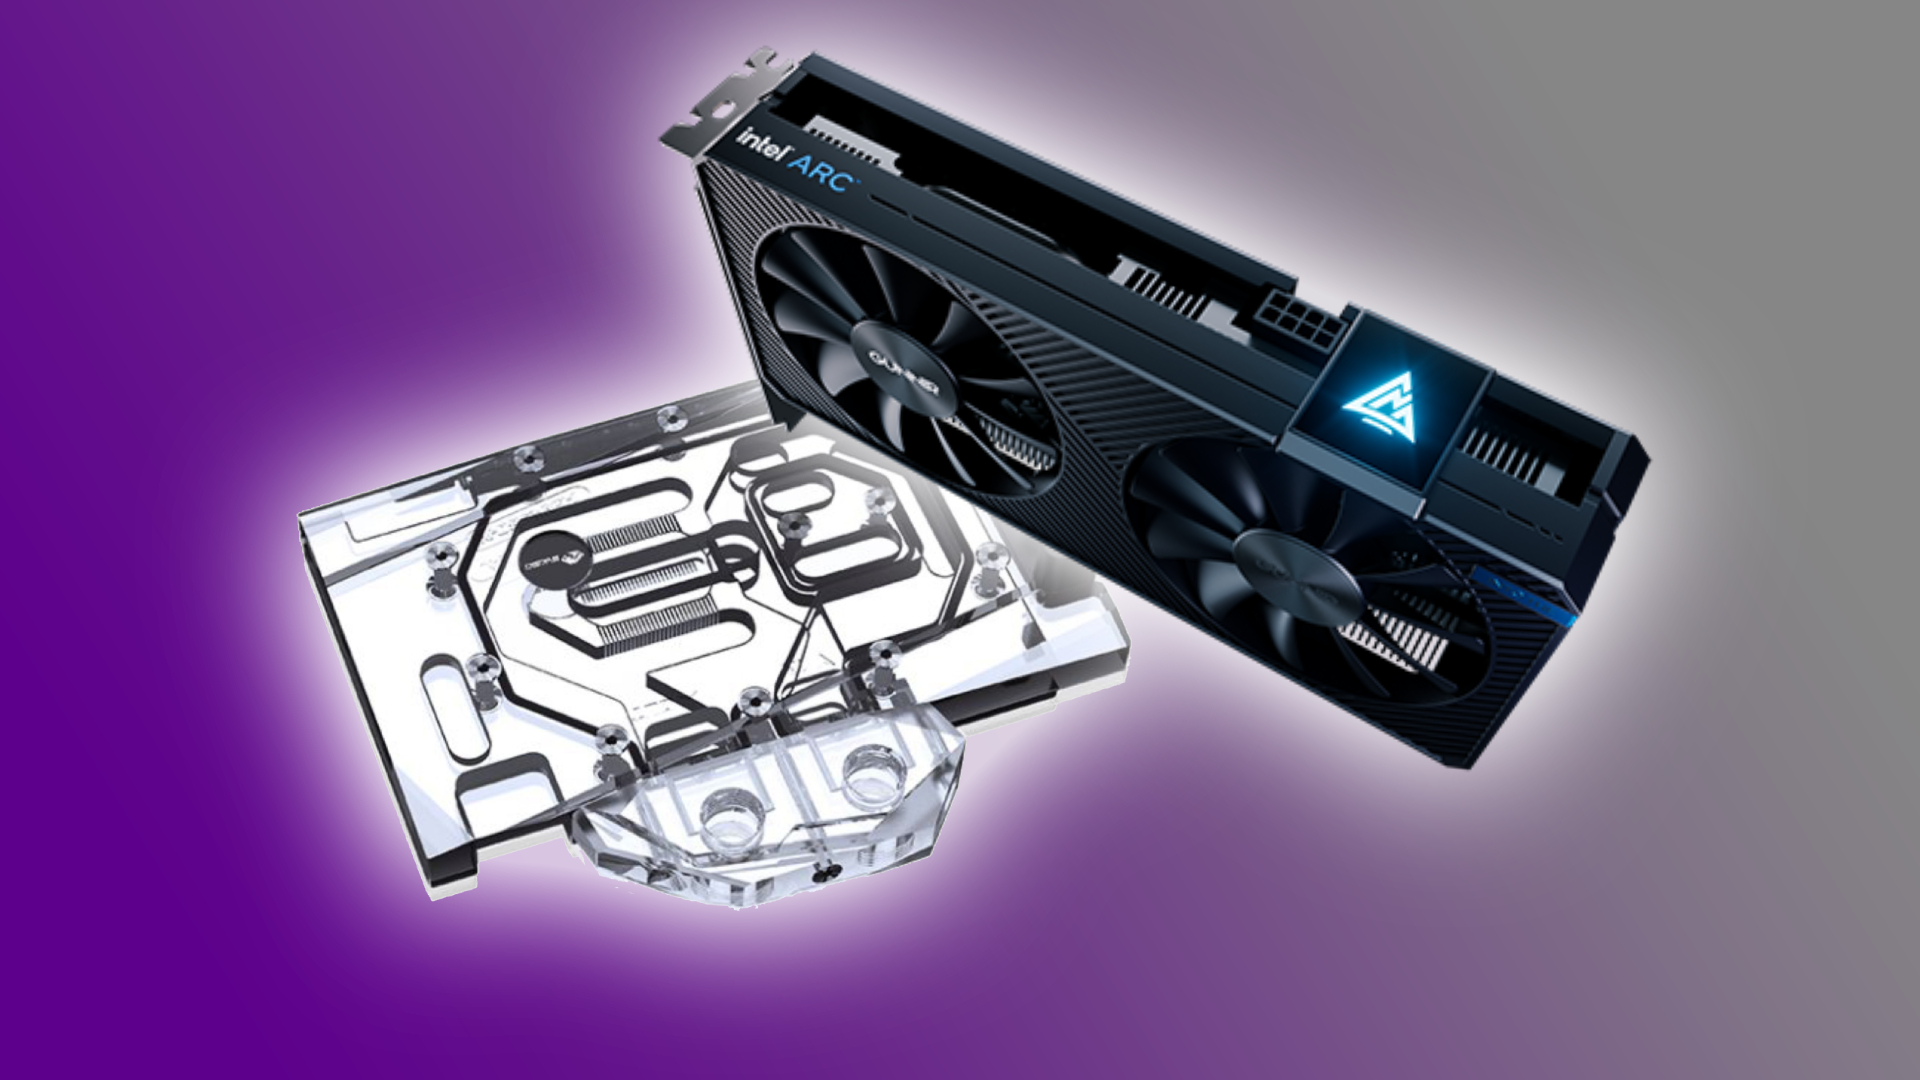 Intel Arc A380 GPU water cooling is now a thing, because reasons